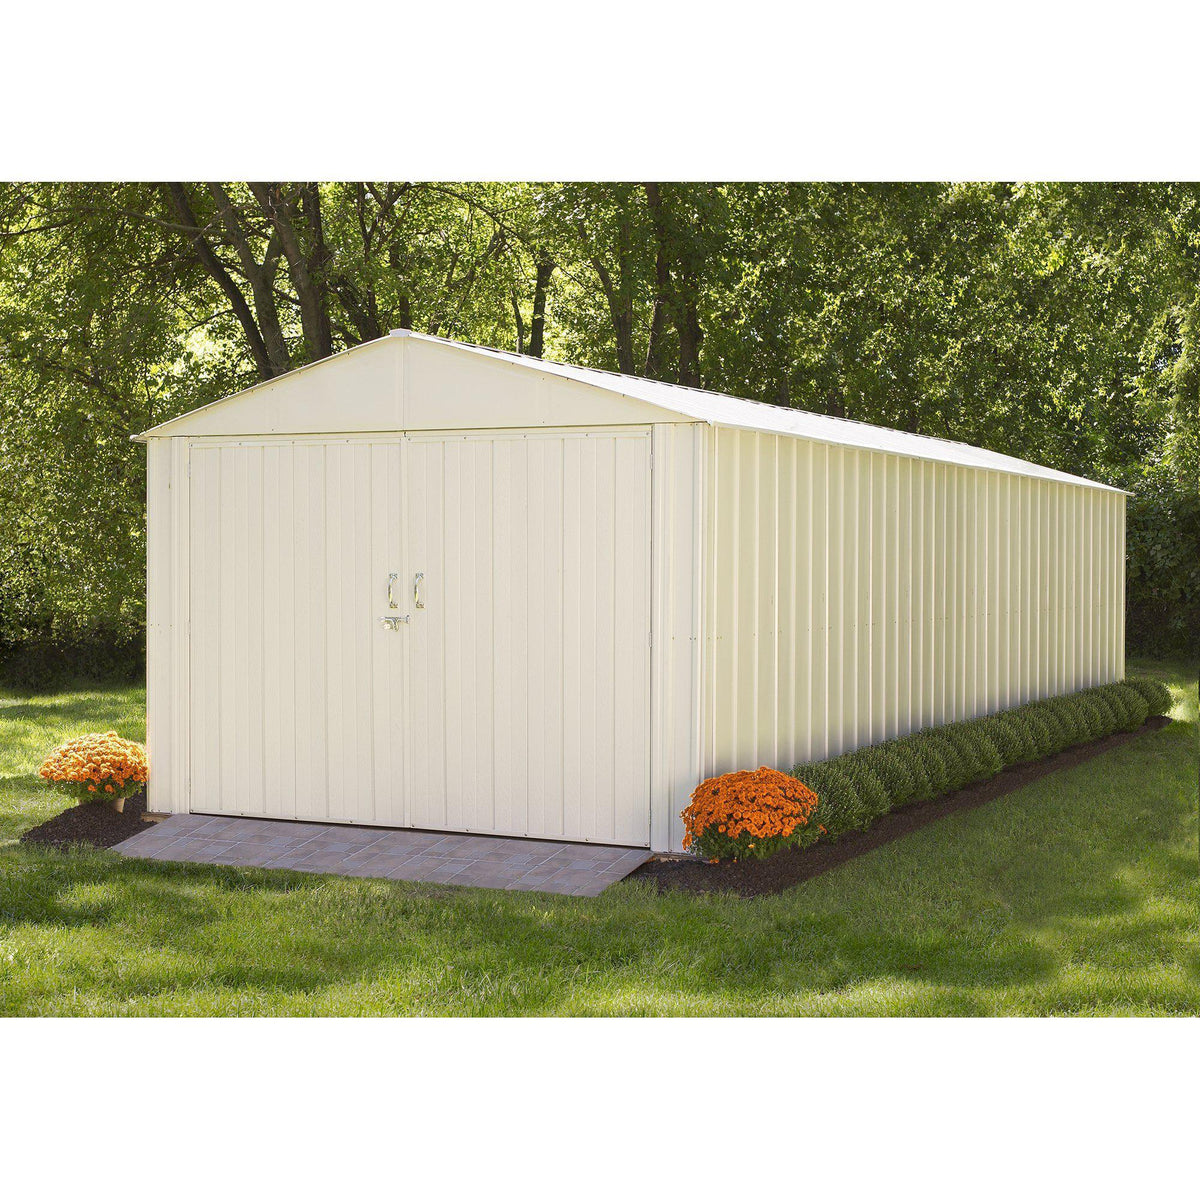 Arrow Steel Storage Shed 10 x 25 Ft. High Gable Galvanized, Eggshell